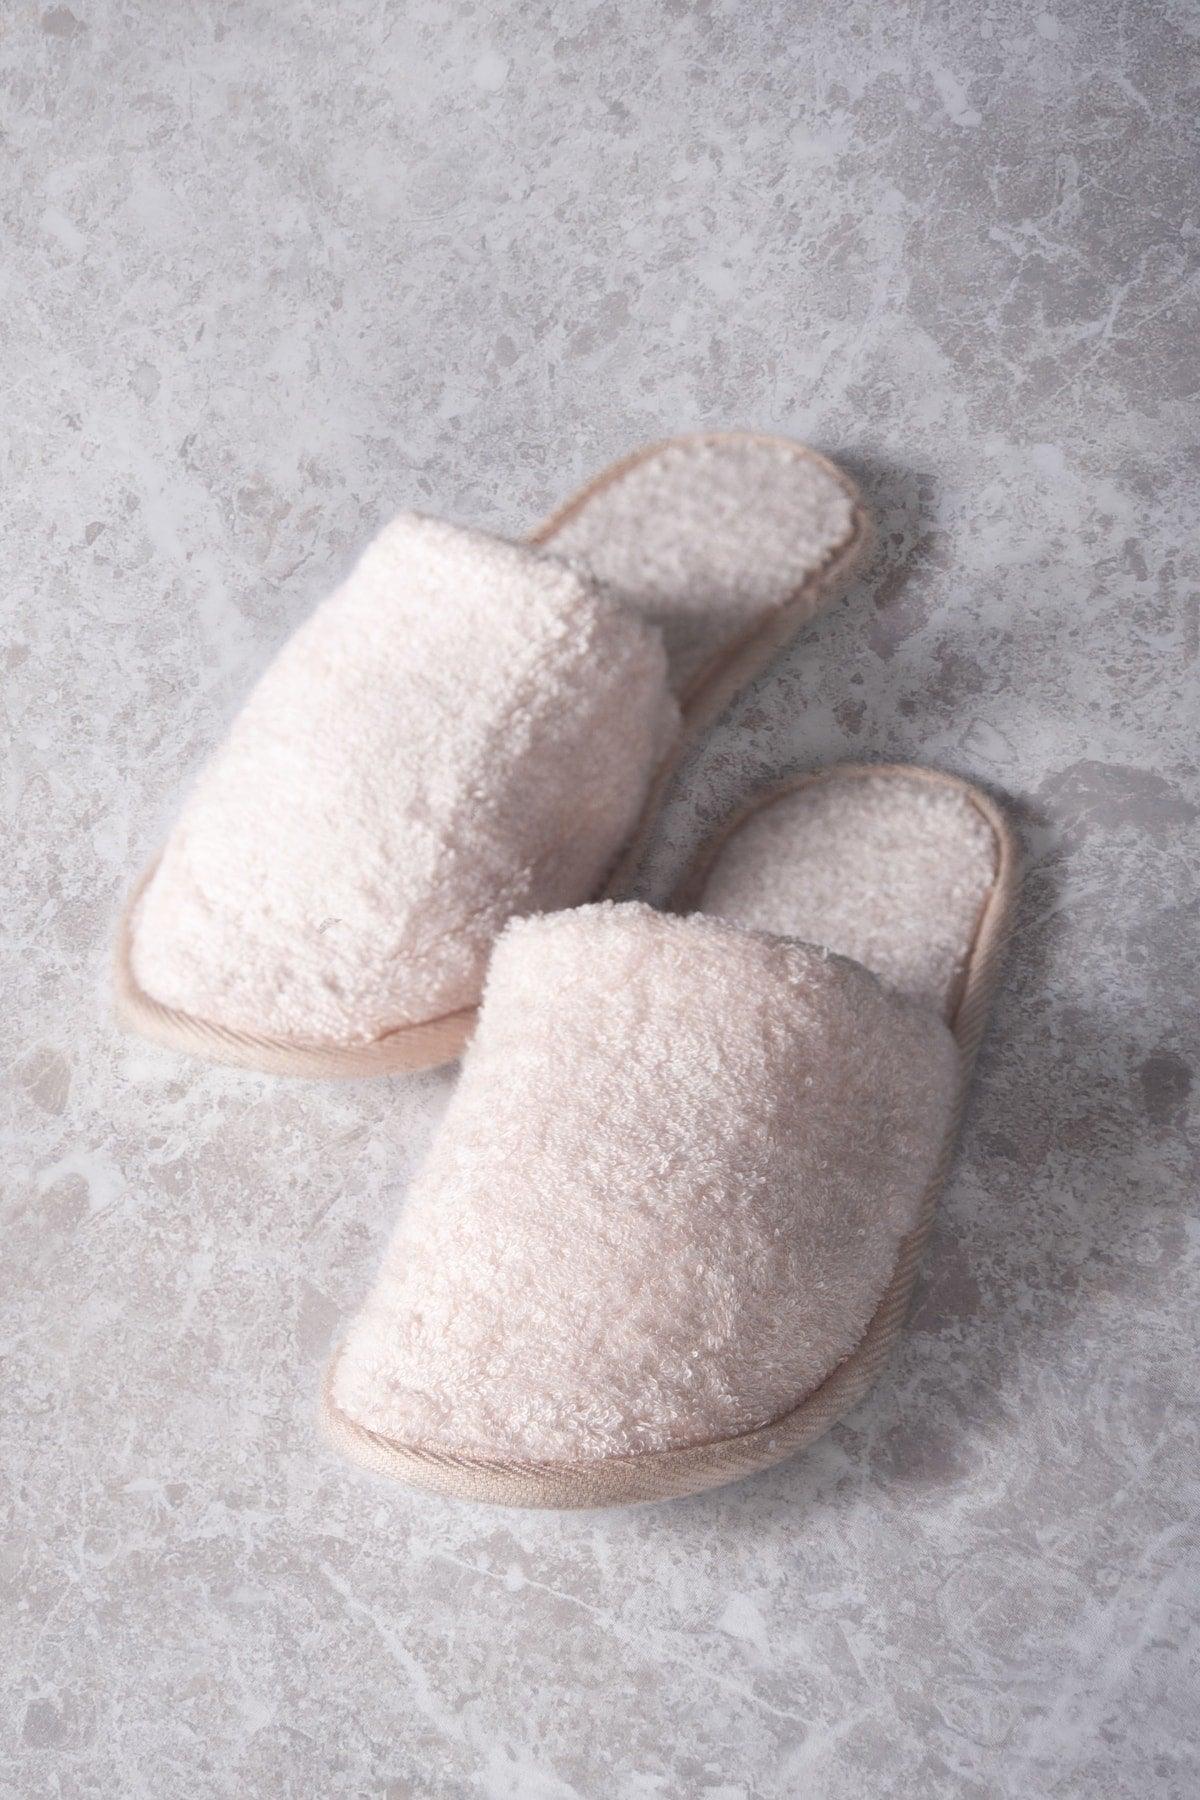 Bamboo Bath And House Slippers Comfortable Towel Slippers Travel Slippers Hospital Slippers Size 38-40 1 Piece - Swordslife